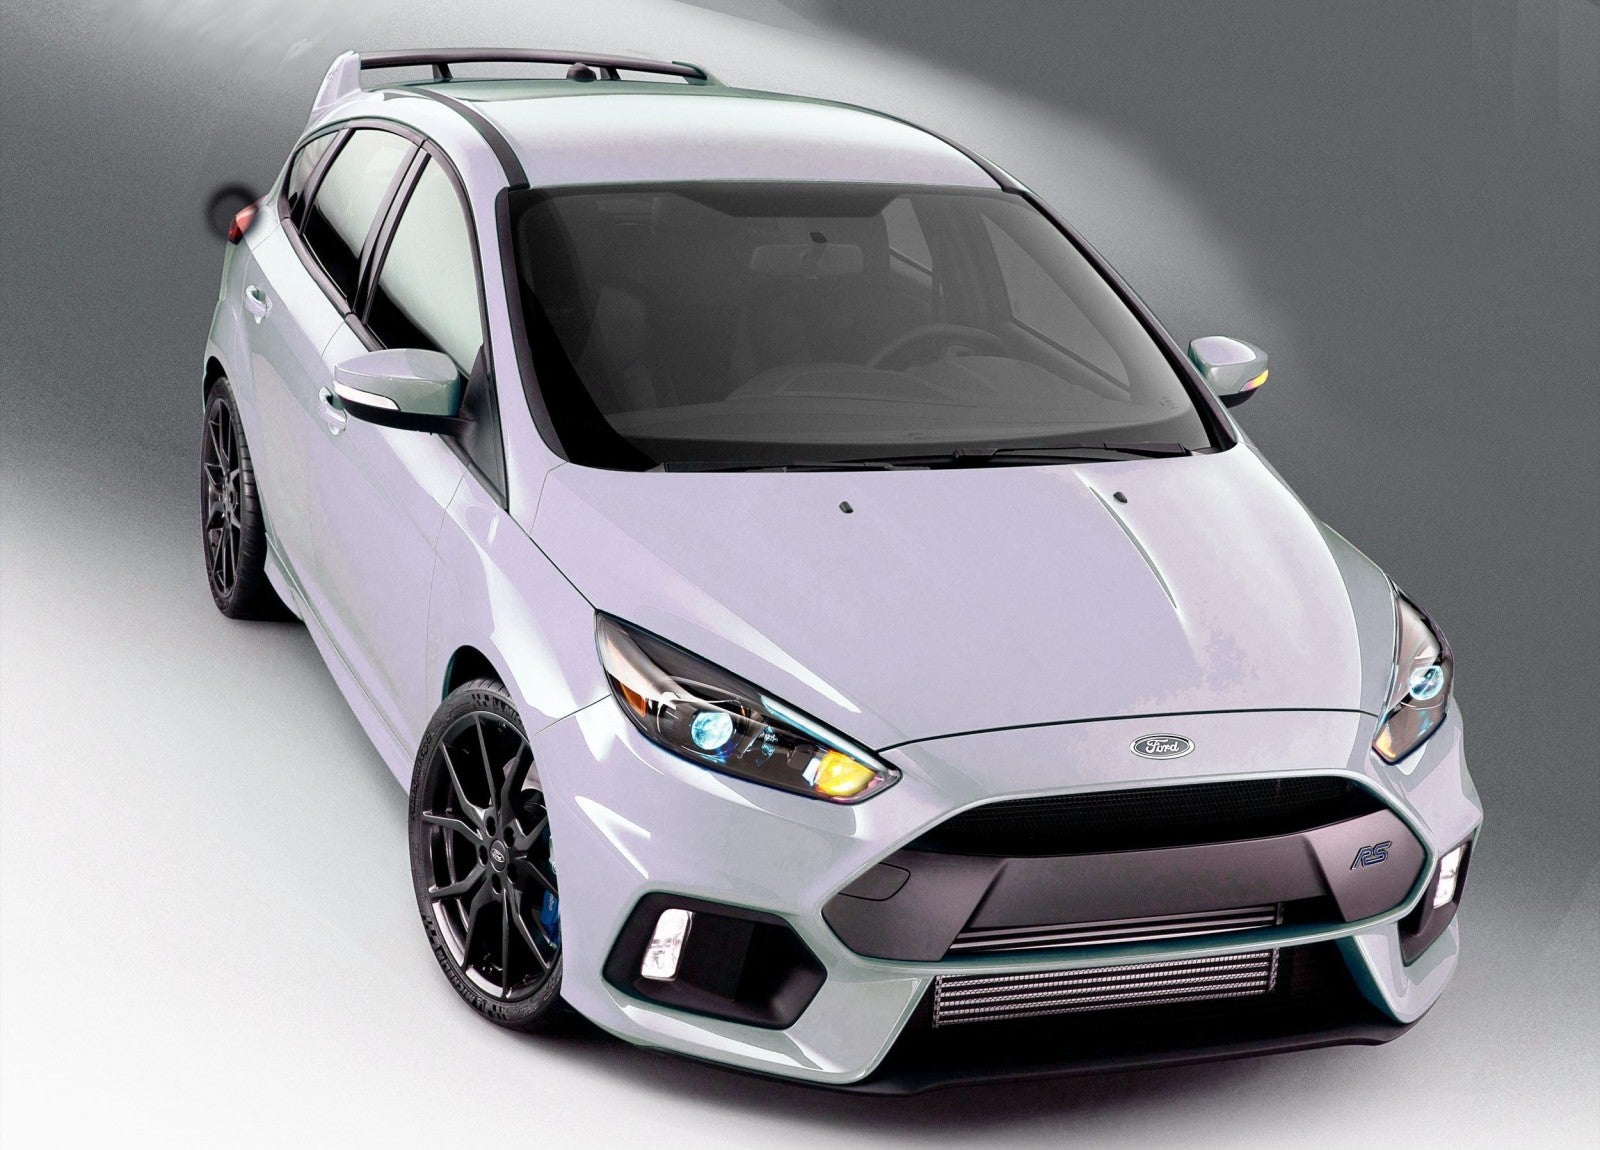 597d1429044169-official-frozen-white-thread-2016-ford-focus-rs-digital-colorizer-51-1600x1150.jpg